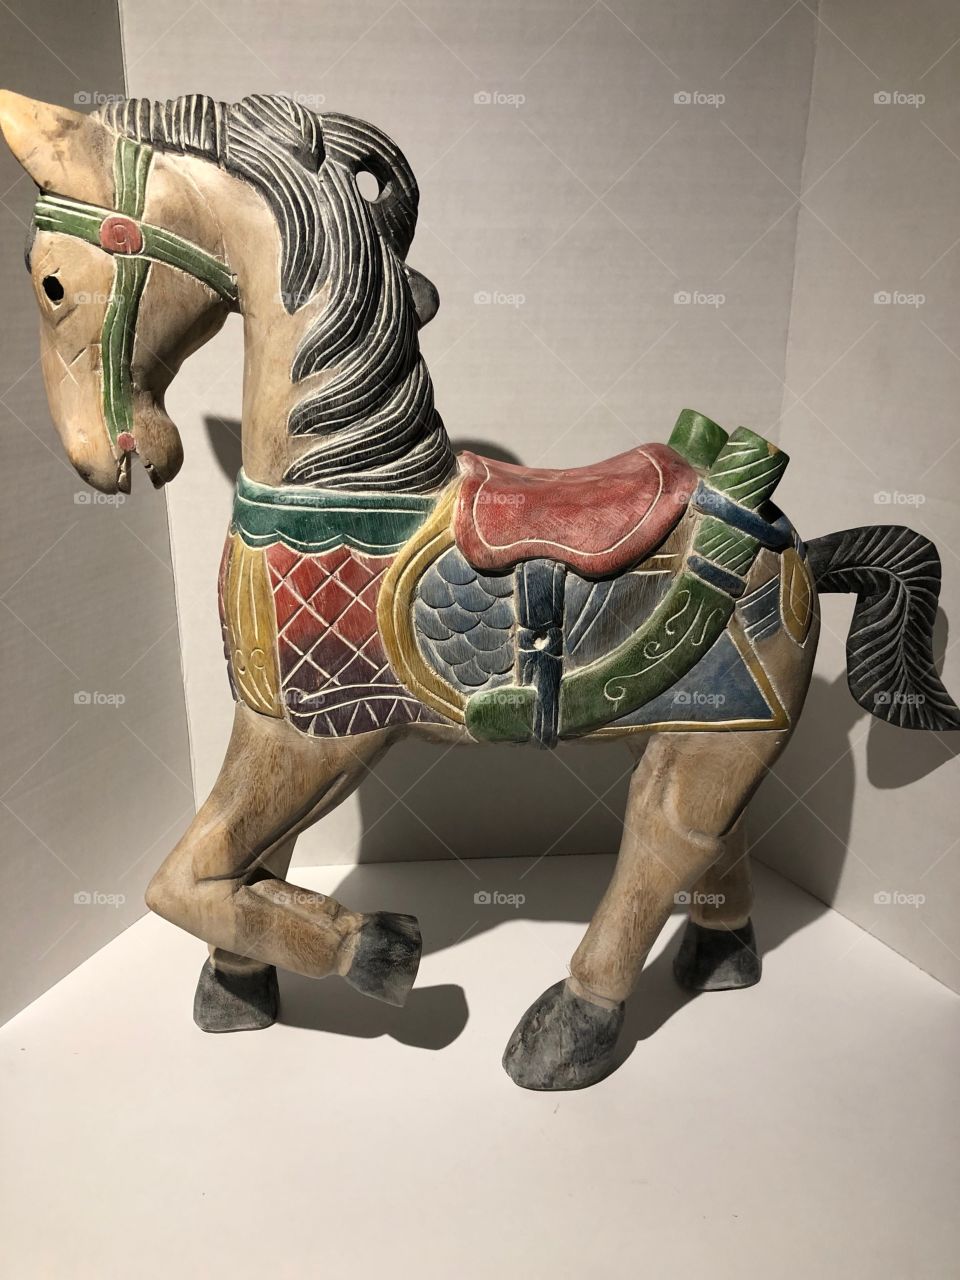 Antique looking wooden horse sculpture with vibrant colours